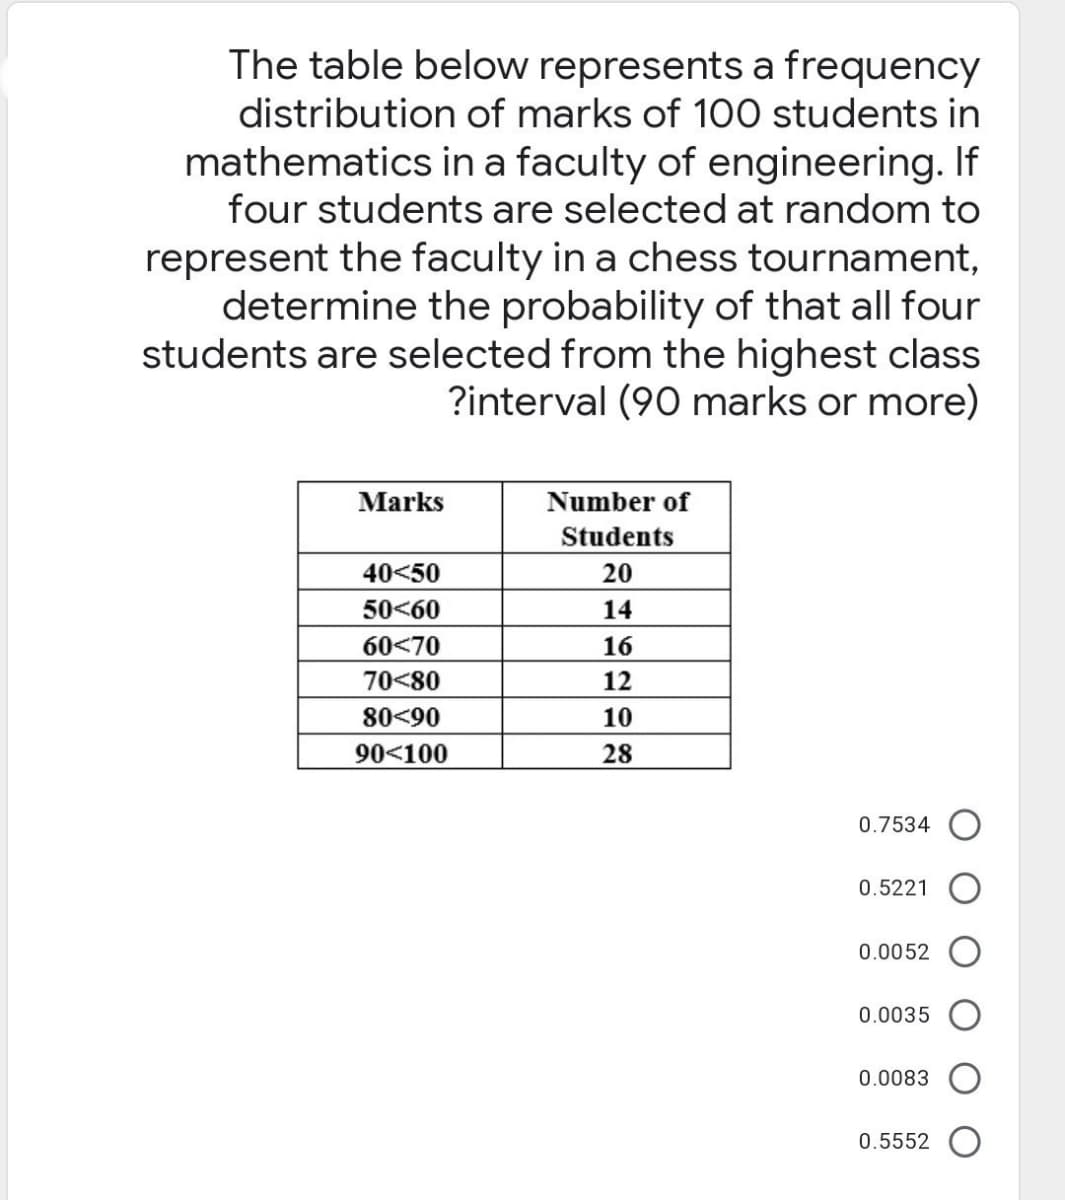 The table below represents a frequency
distribution of marks of 100 students in
mathematics in a faculty of engineering. If
four students are selected at random to
represent the faculty in a chess tournament,
determine the probability of that all four
students are selected from the highest class
?interval (90 marks or more)
Marks
40<50
50-60
60-70
70-80
80-90
90<100
Number of
Students
20
14
16
12
10
28
0.7534
0.5221
0.0052
0.0035
0.0083
0.5552